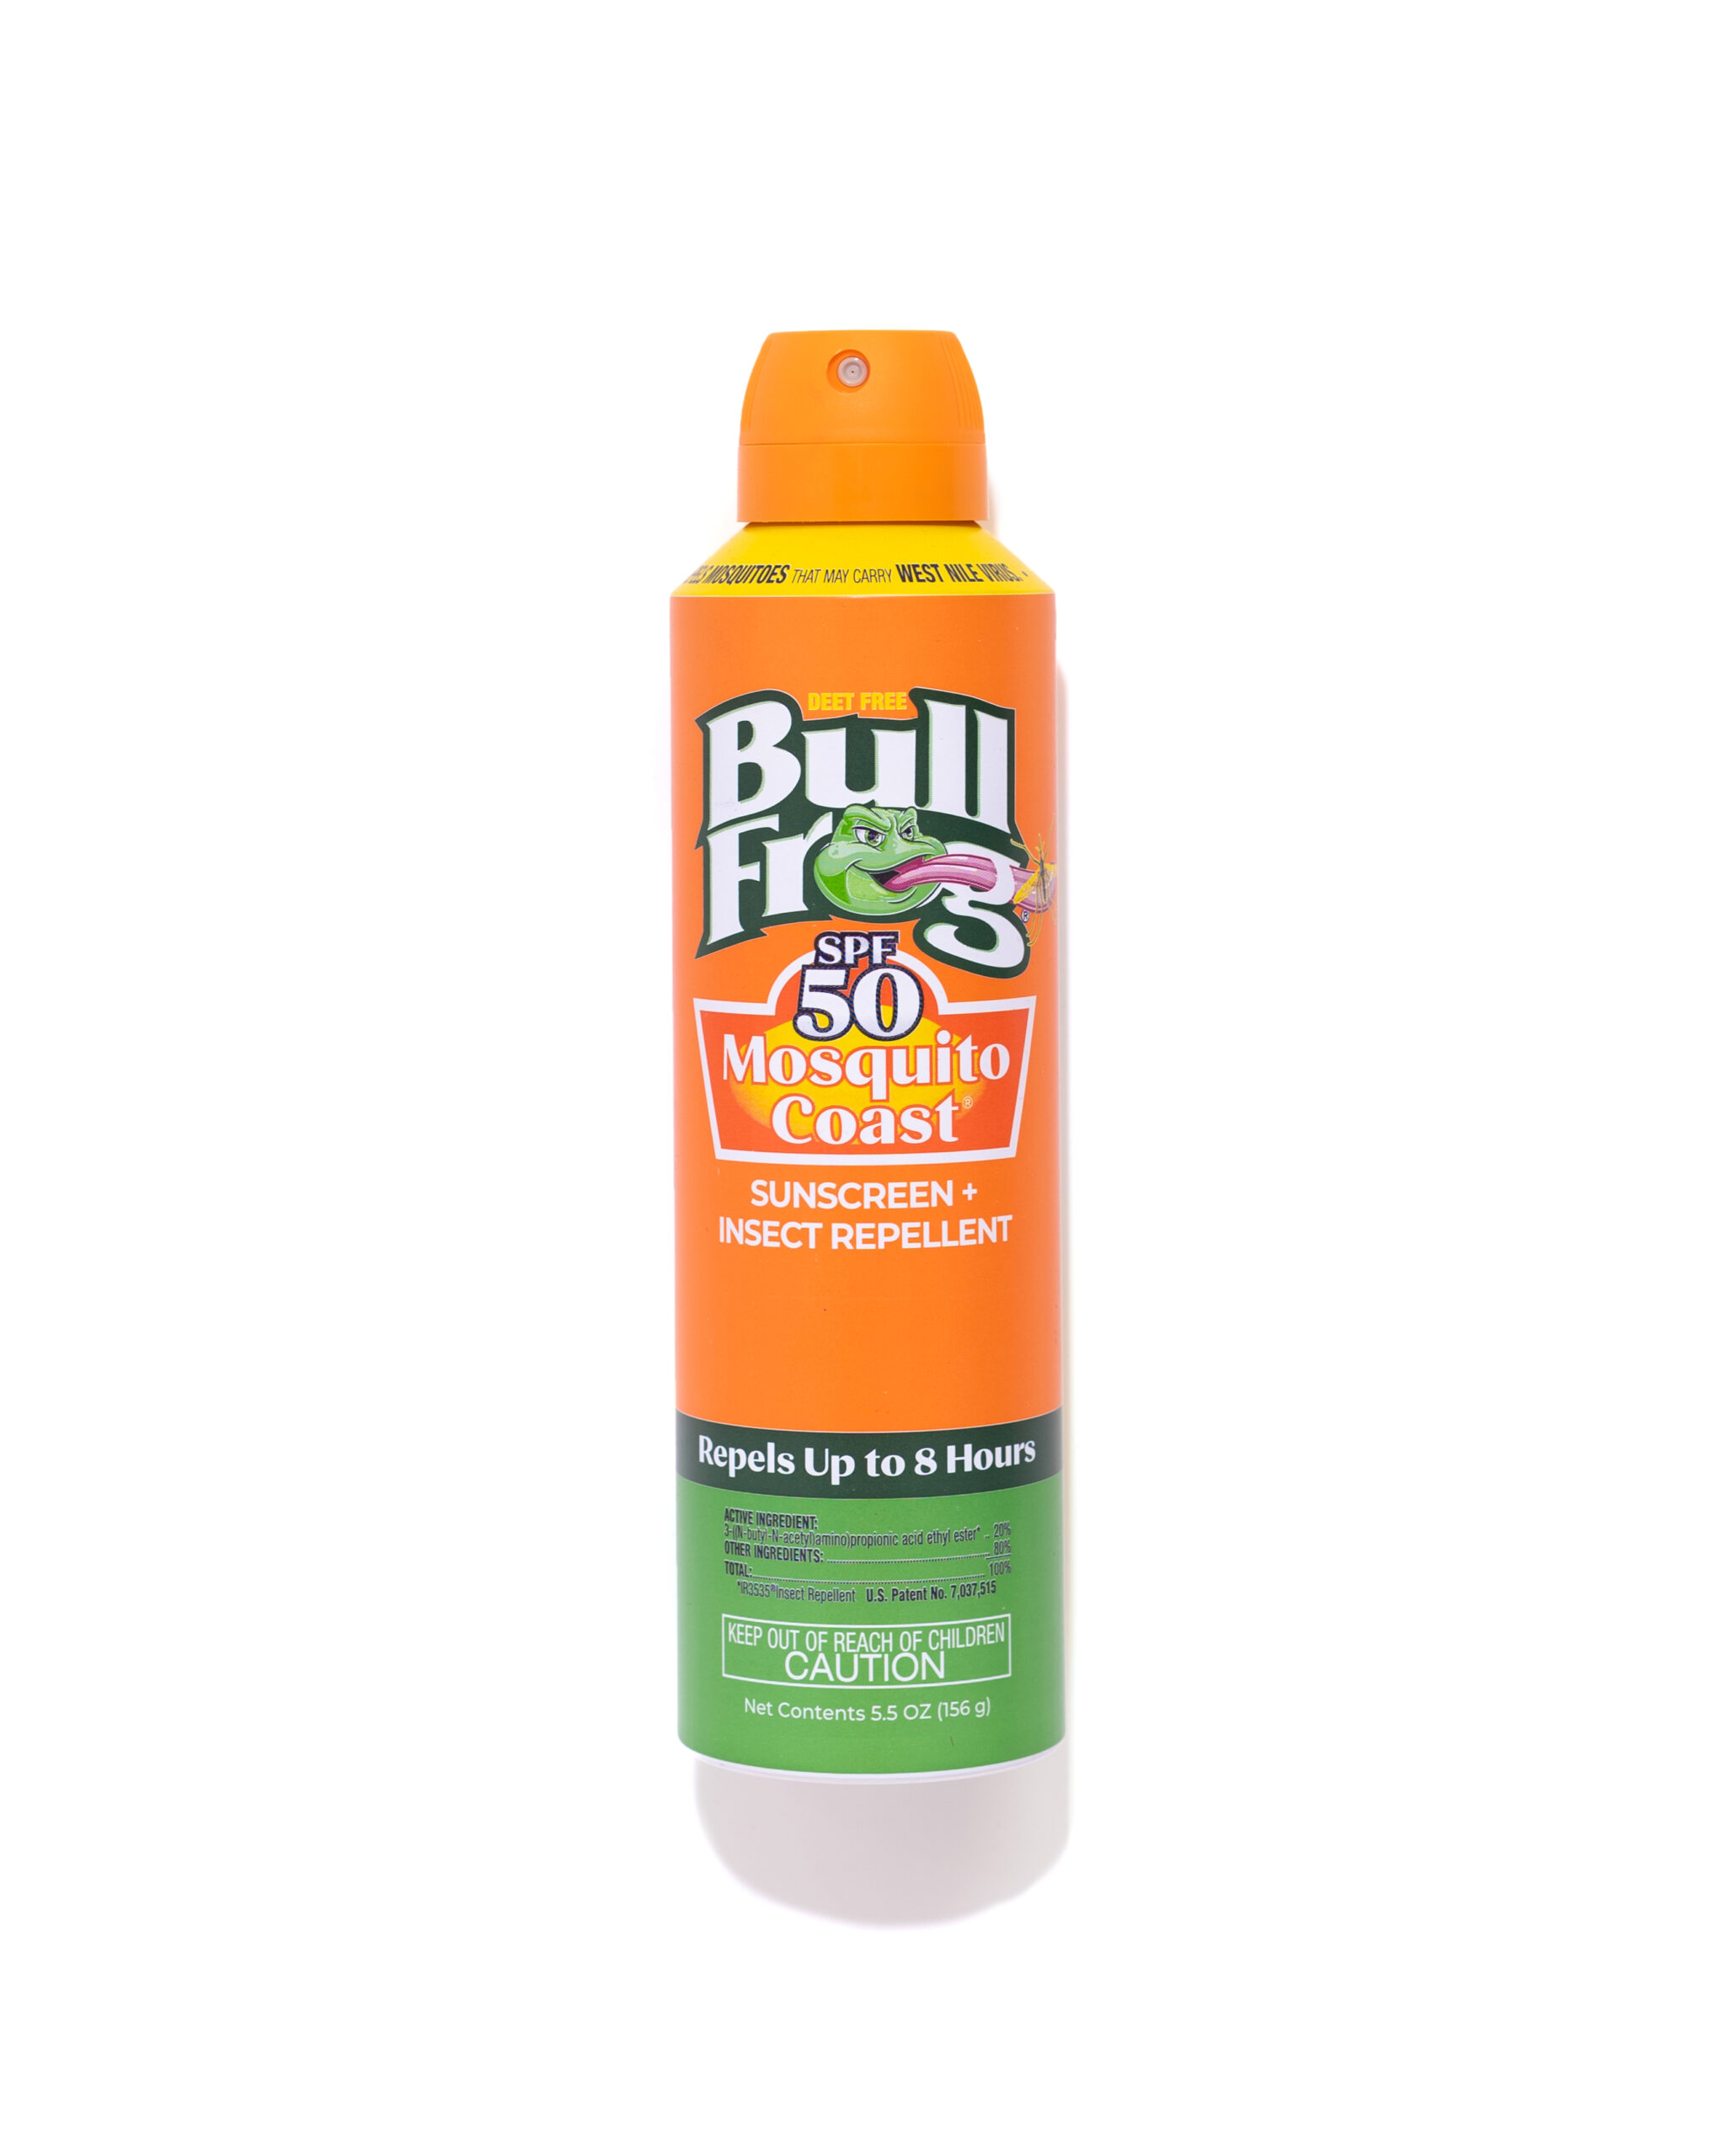 BULLFROG SUNSCREEN & INSECT REPELLENT - Insect Repellent